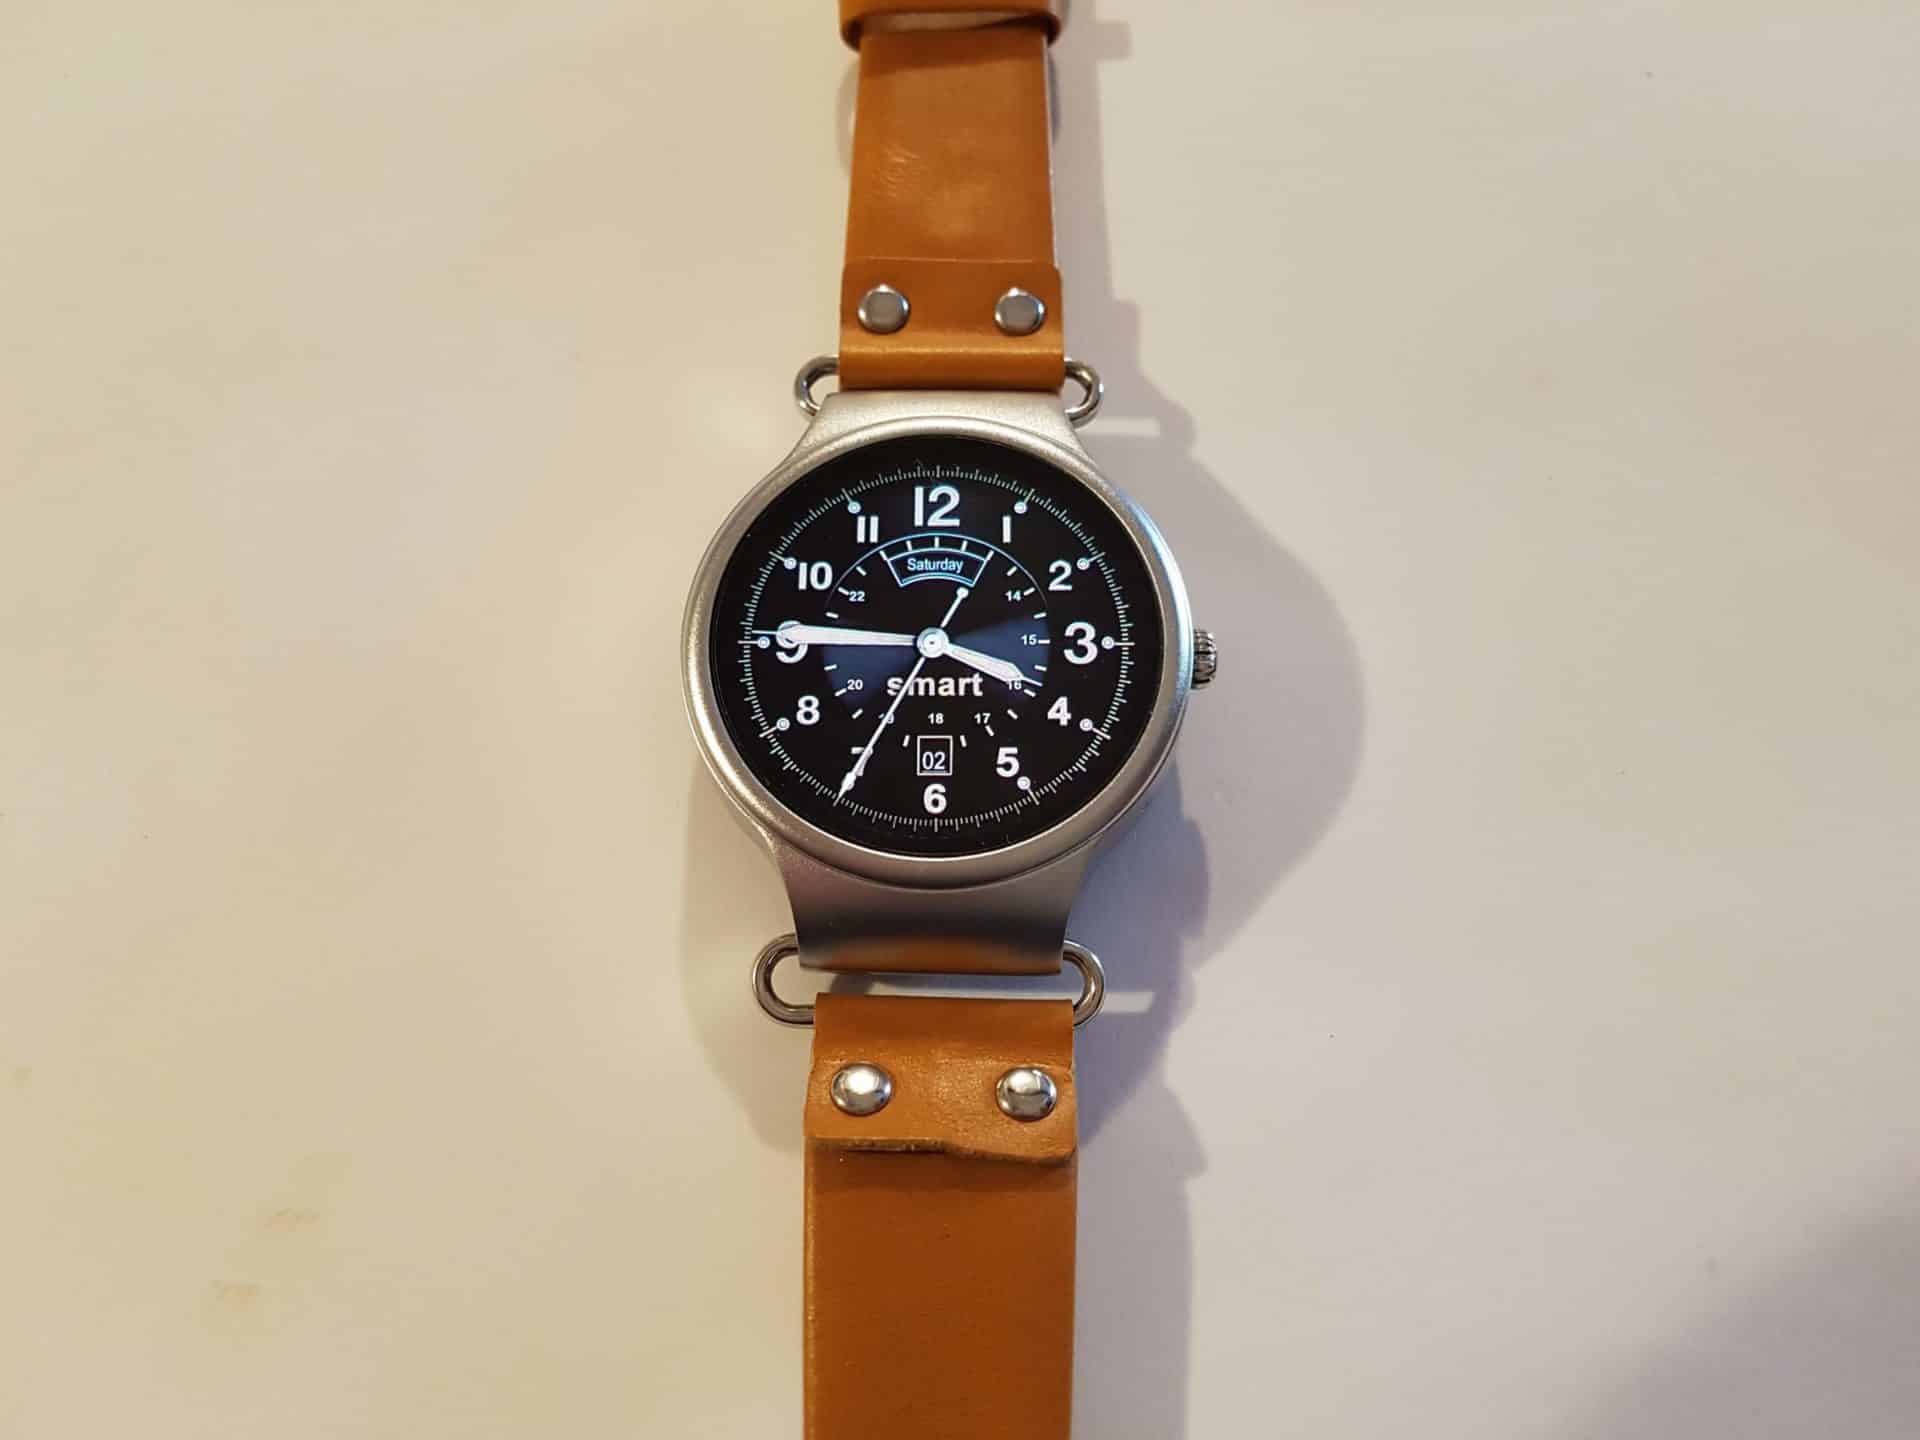 Article photo: KingWear KW98 Review – cheap Android smartwatch